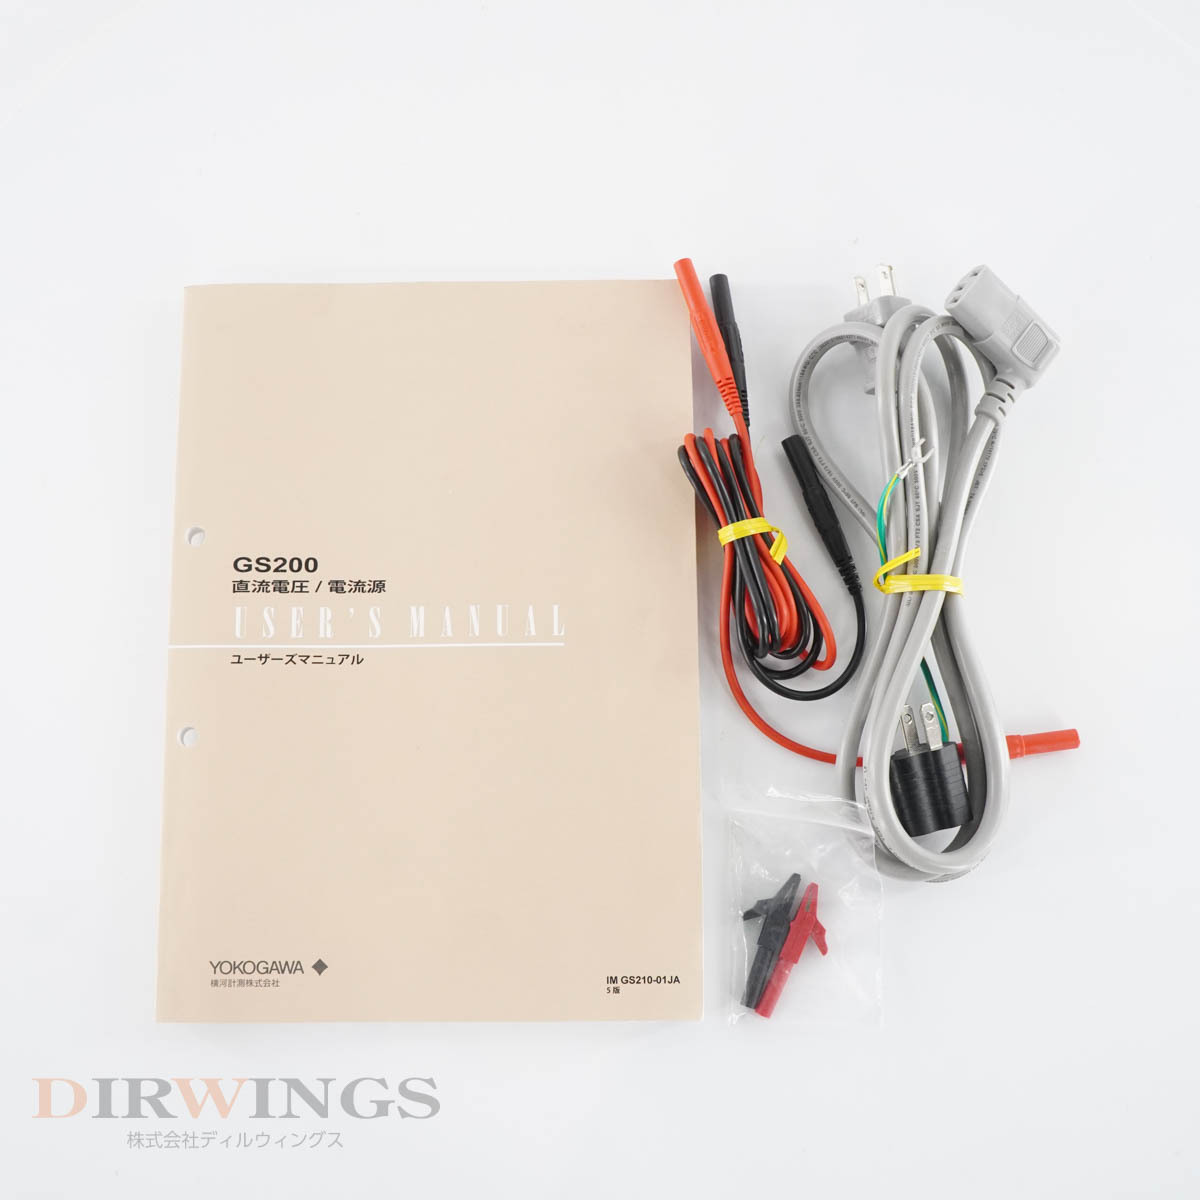 [DW] 8 day guarantee GS200 GS210-1-M/MON/C10 YOKOGAWA width river DC VOLTAGE/CURRENT SOURCE direct current voltage / electric current source power cord owner manual [05890-0061]